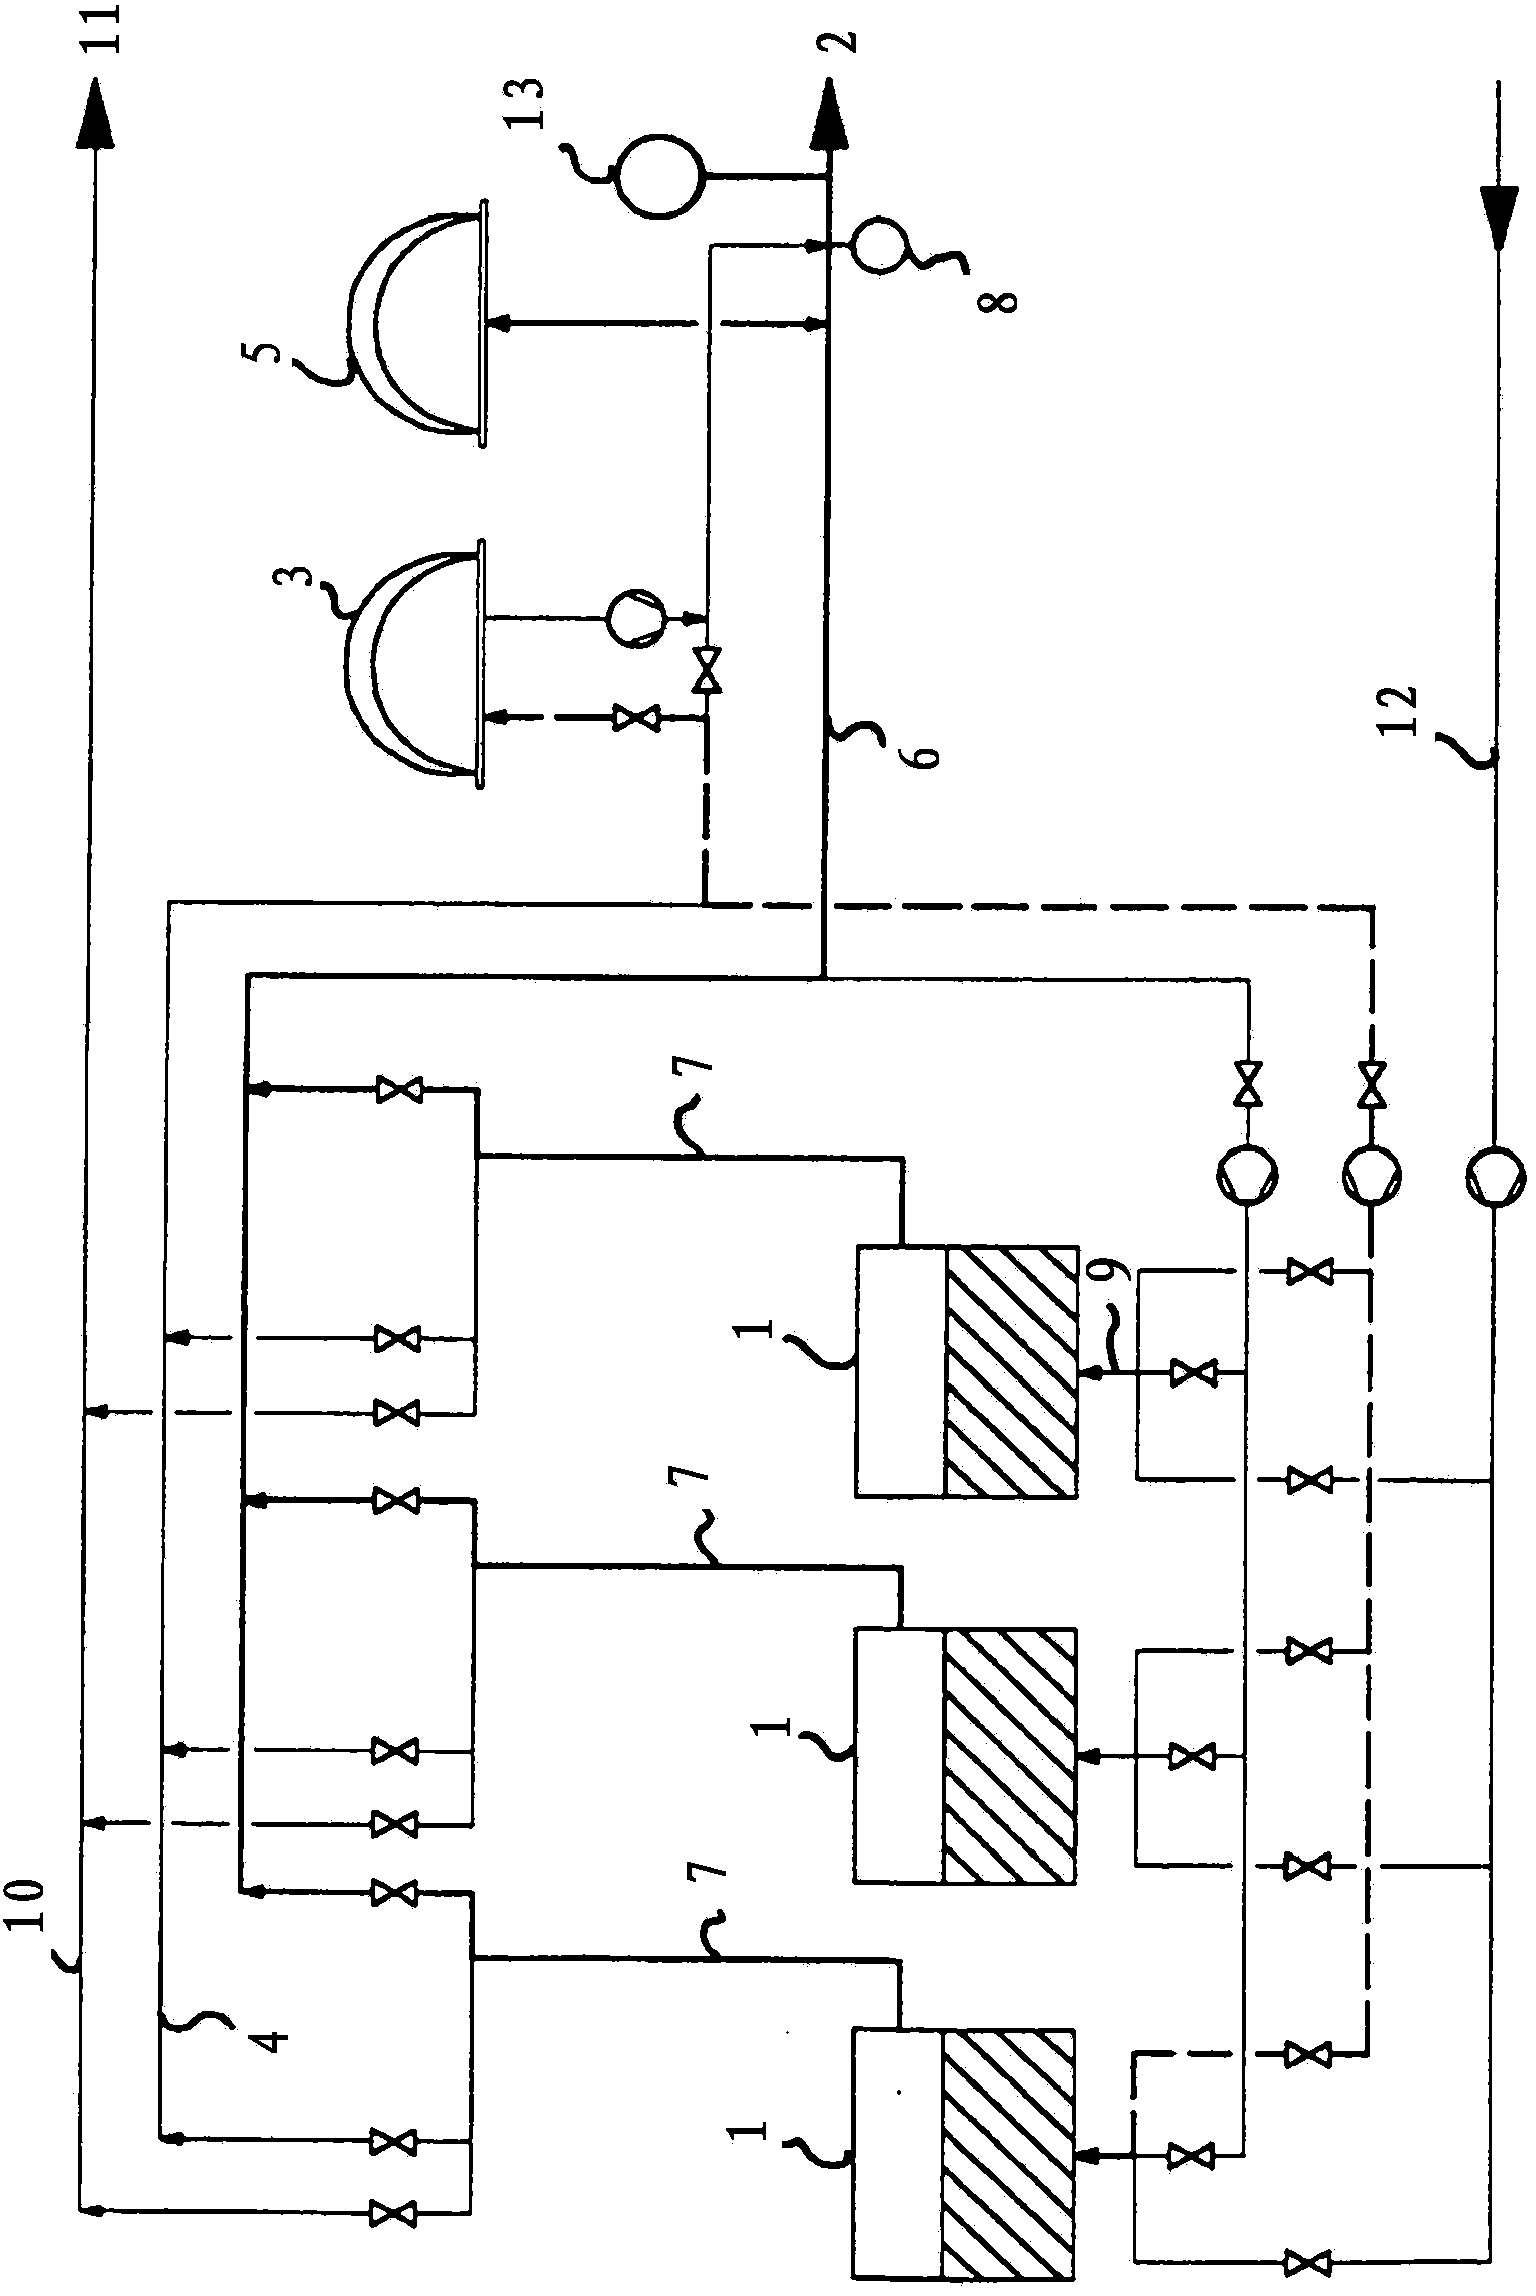 Biogas plant and method for operating a biogas plant